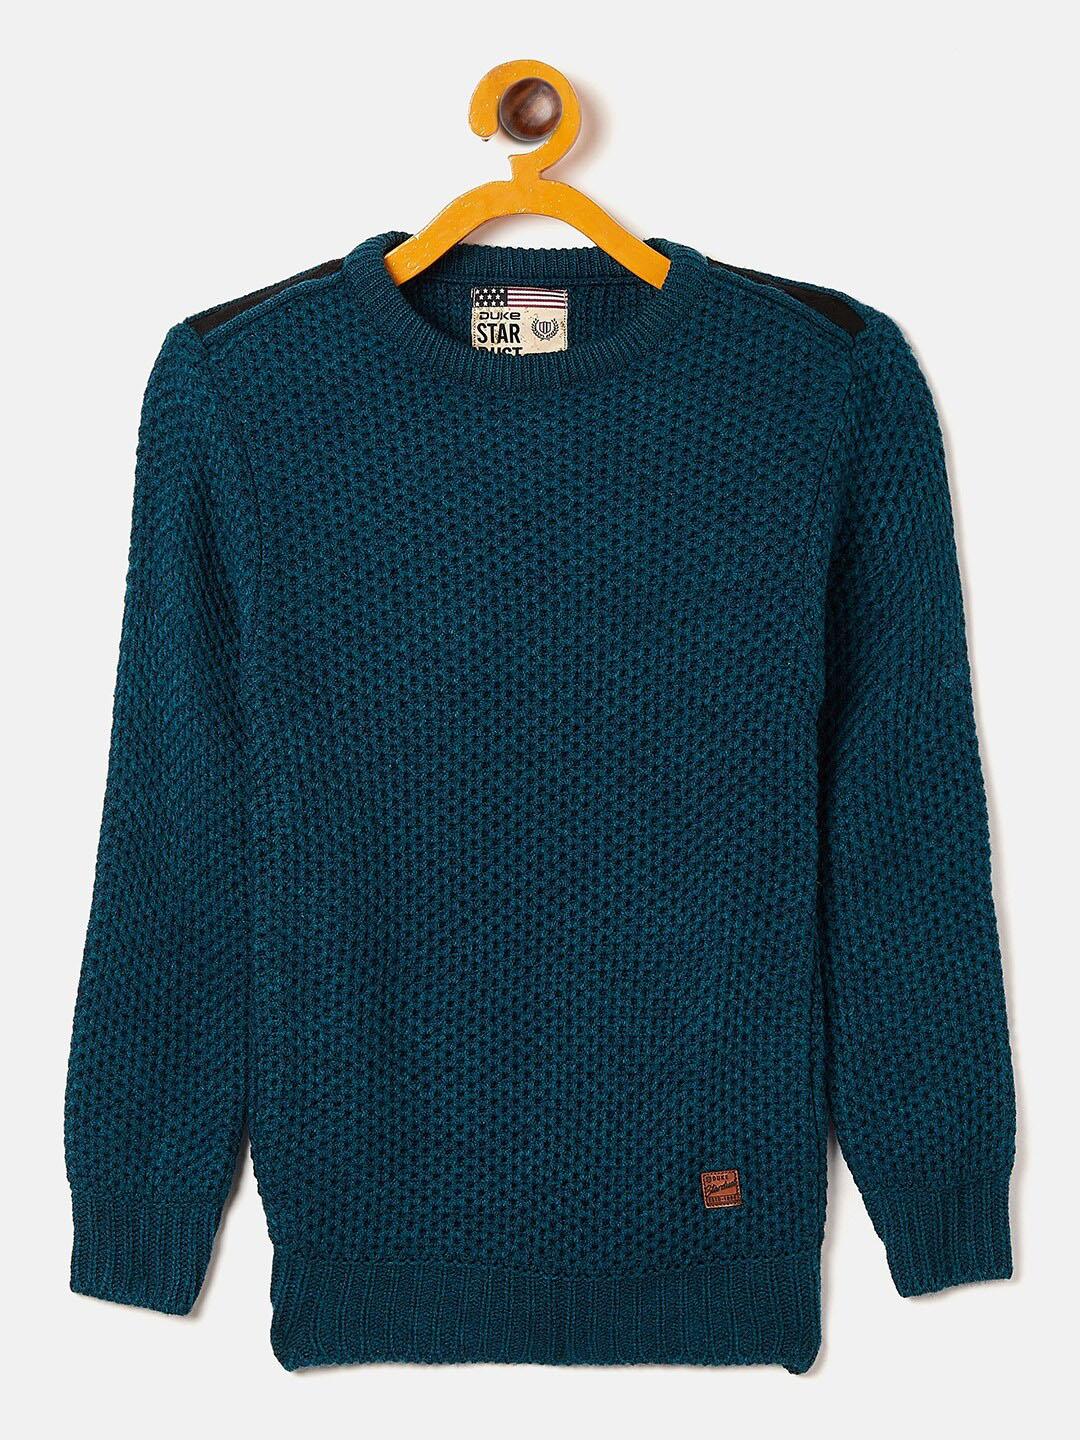 duke-boys-blue-cable-knit-woolen-pullover